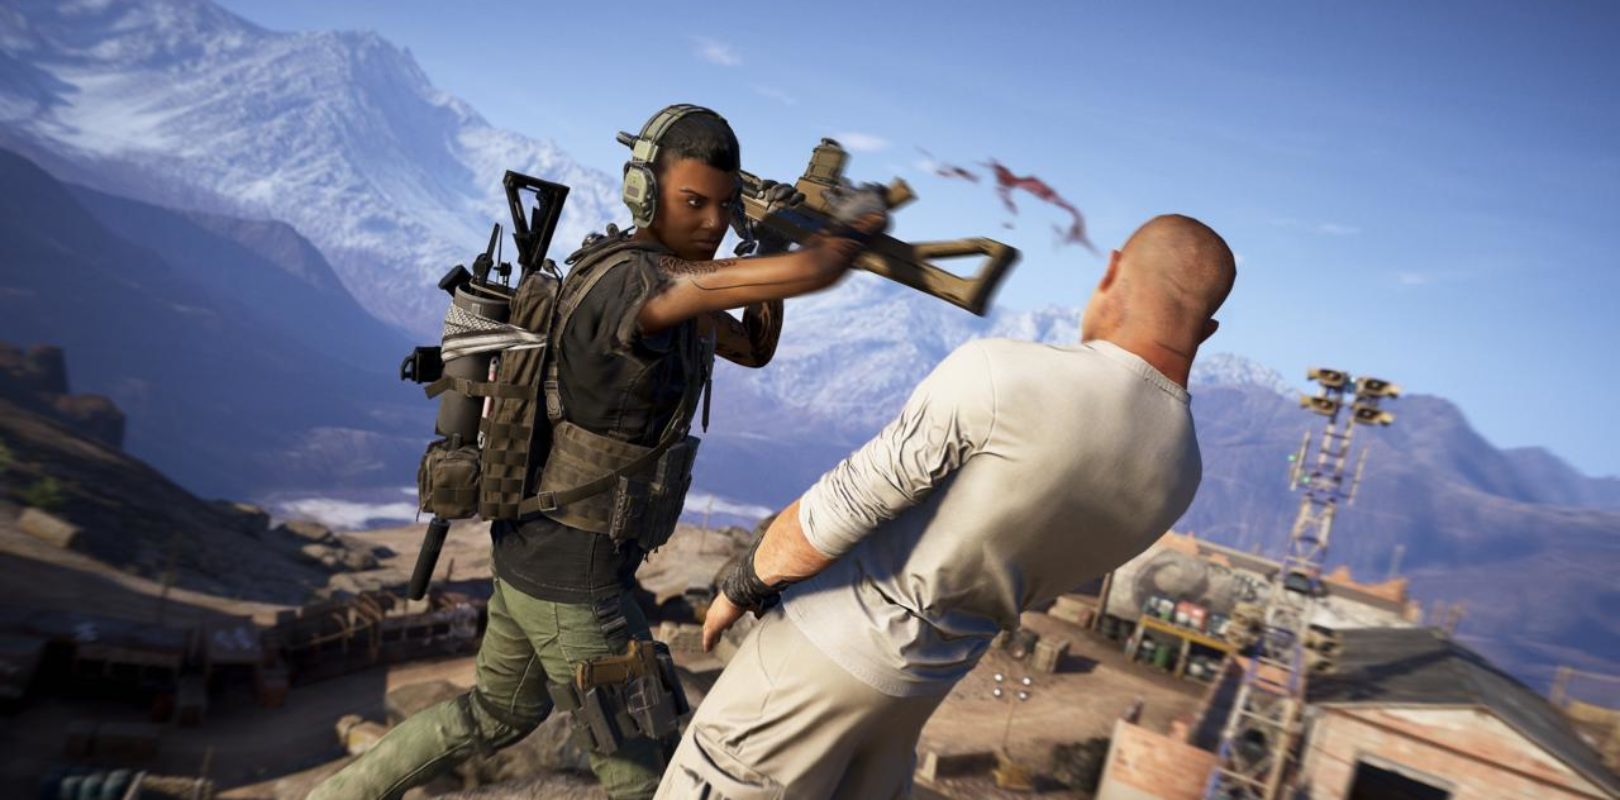 ghost recon wildlands download size xbox one